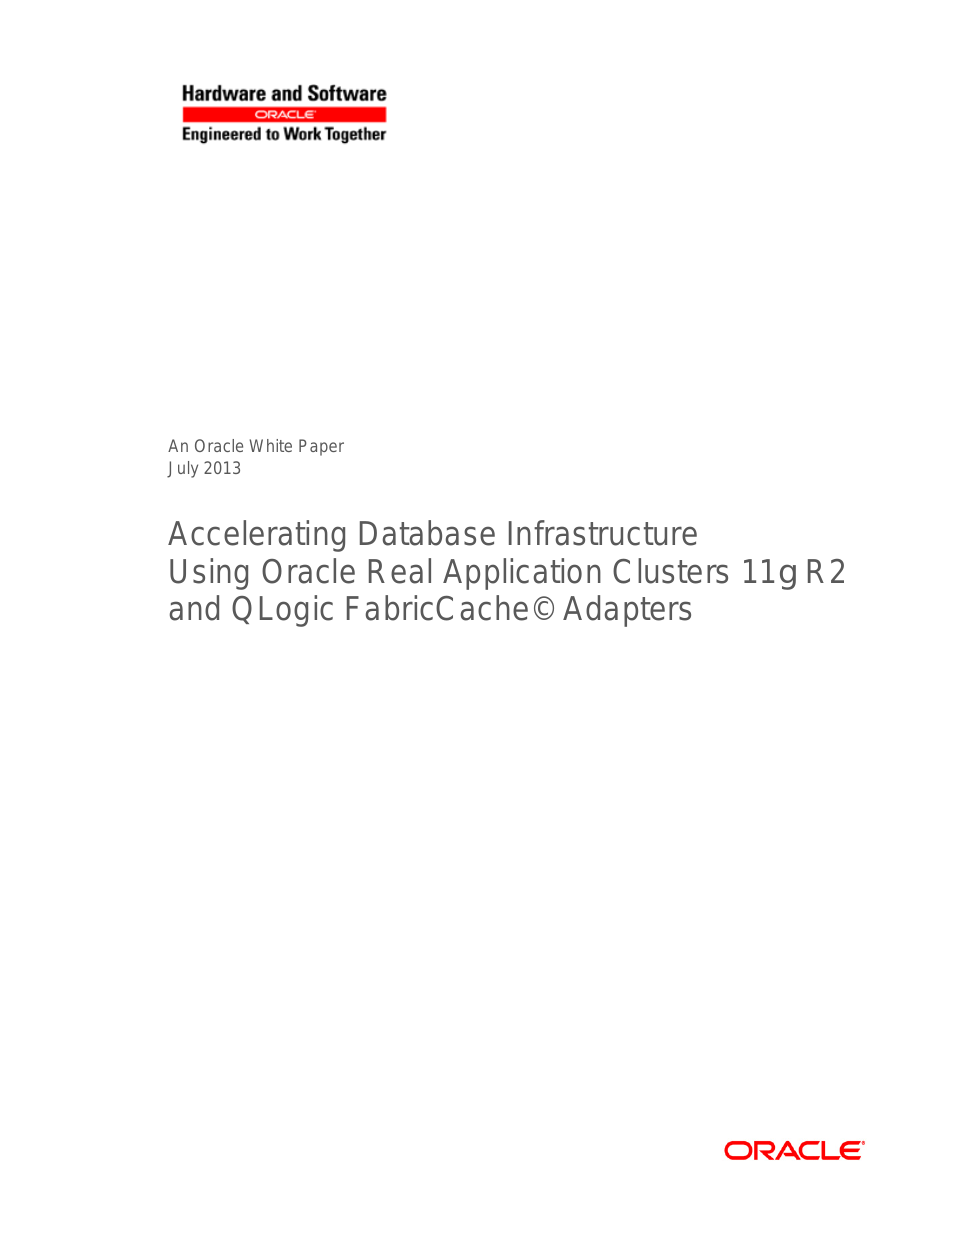 10000 Series Accelerating Database Infrastructure Using Oracle Real Application Clusters 11g R2 and QLogic FabricCache© Adapters